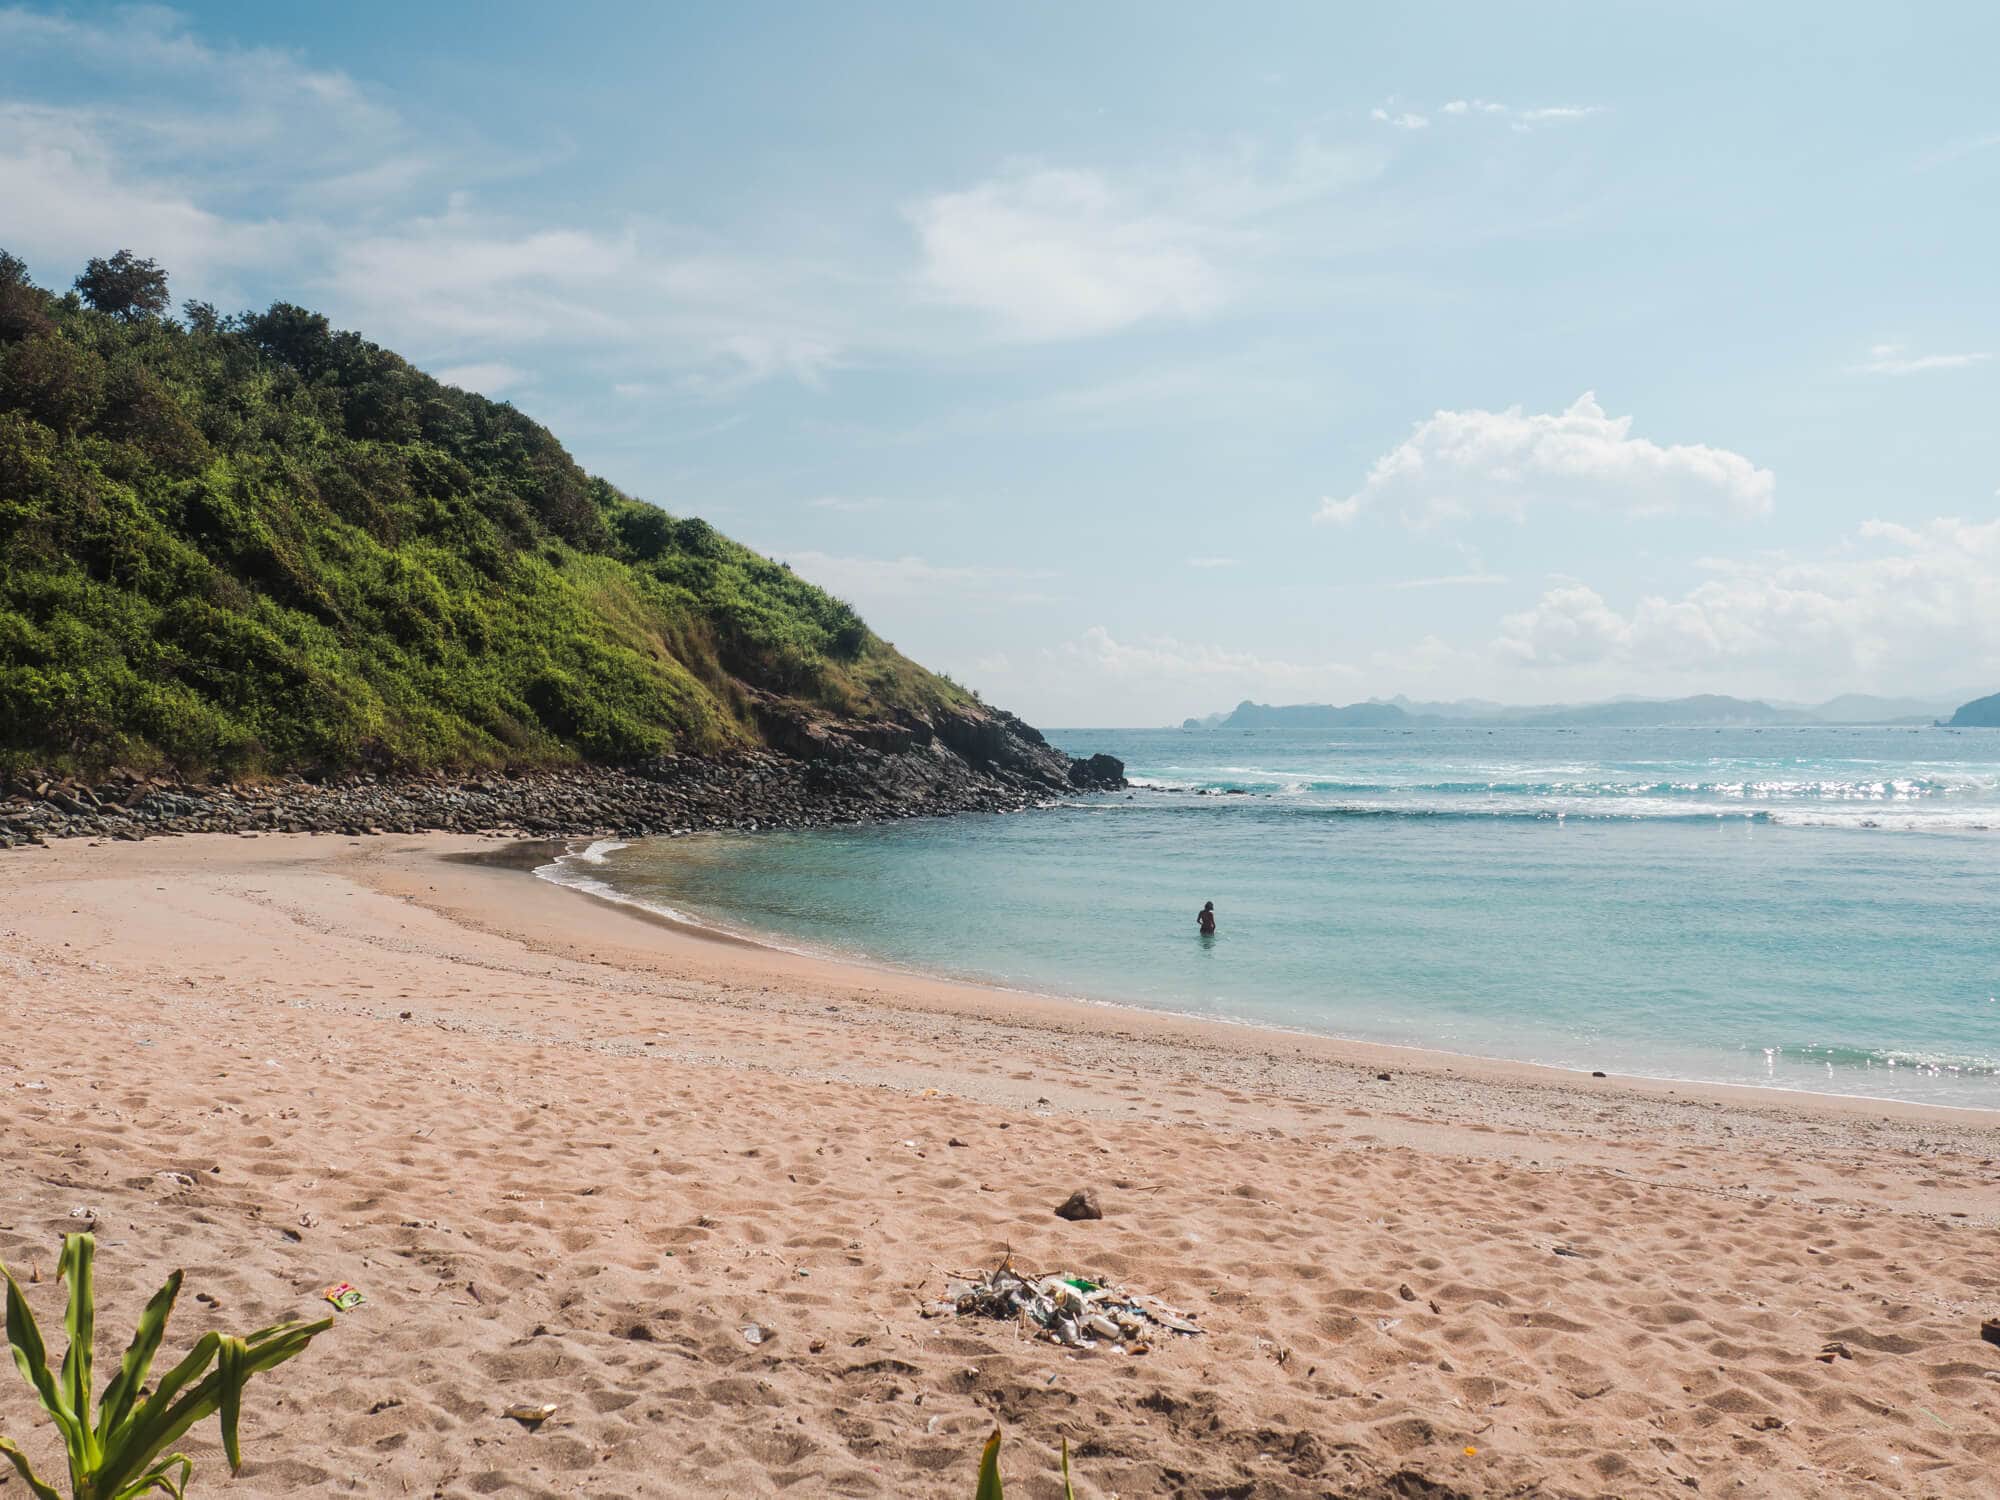 Pantai Mawi, one of the best surfing beaches in Kuta Lombok